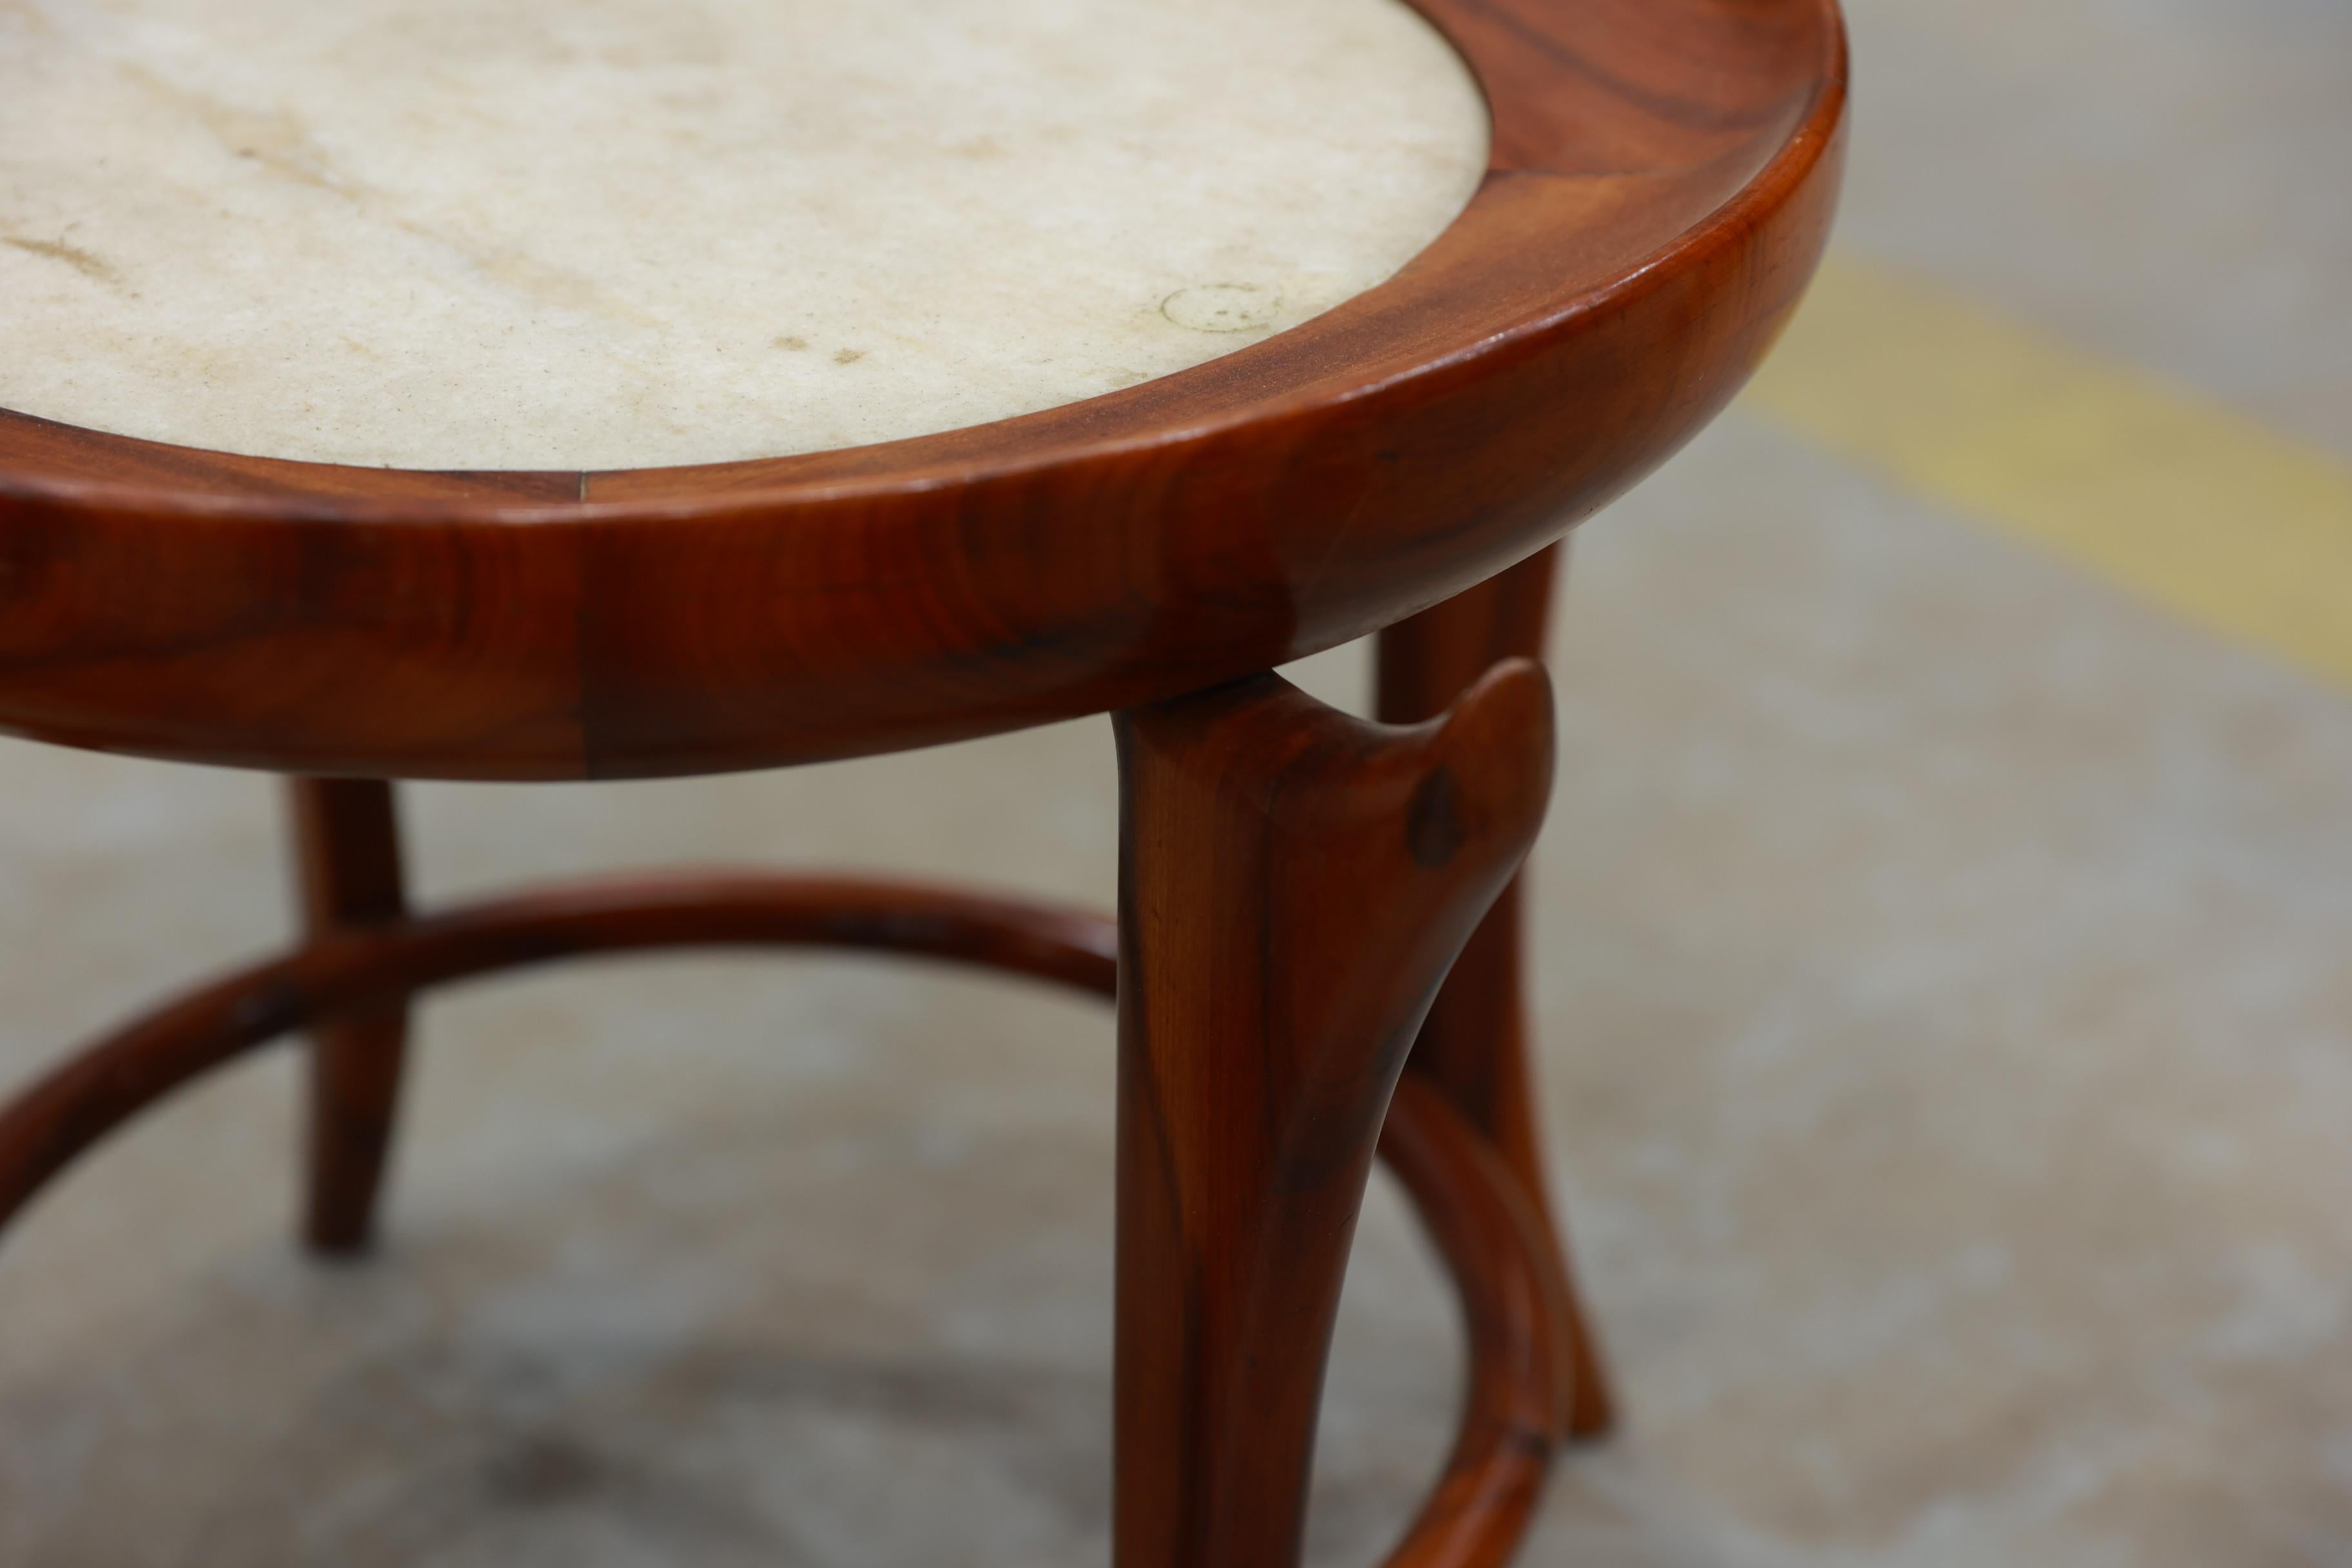 Mid-20th Century Brazilian Modern Side Table in Hardwood & Marble by Giuseppe Scapinelli, Brazil